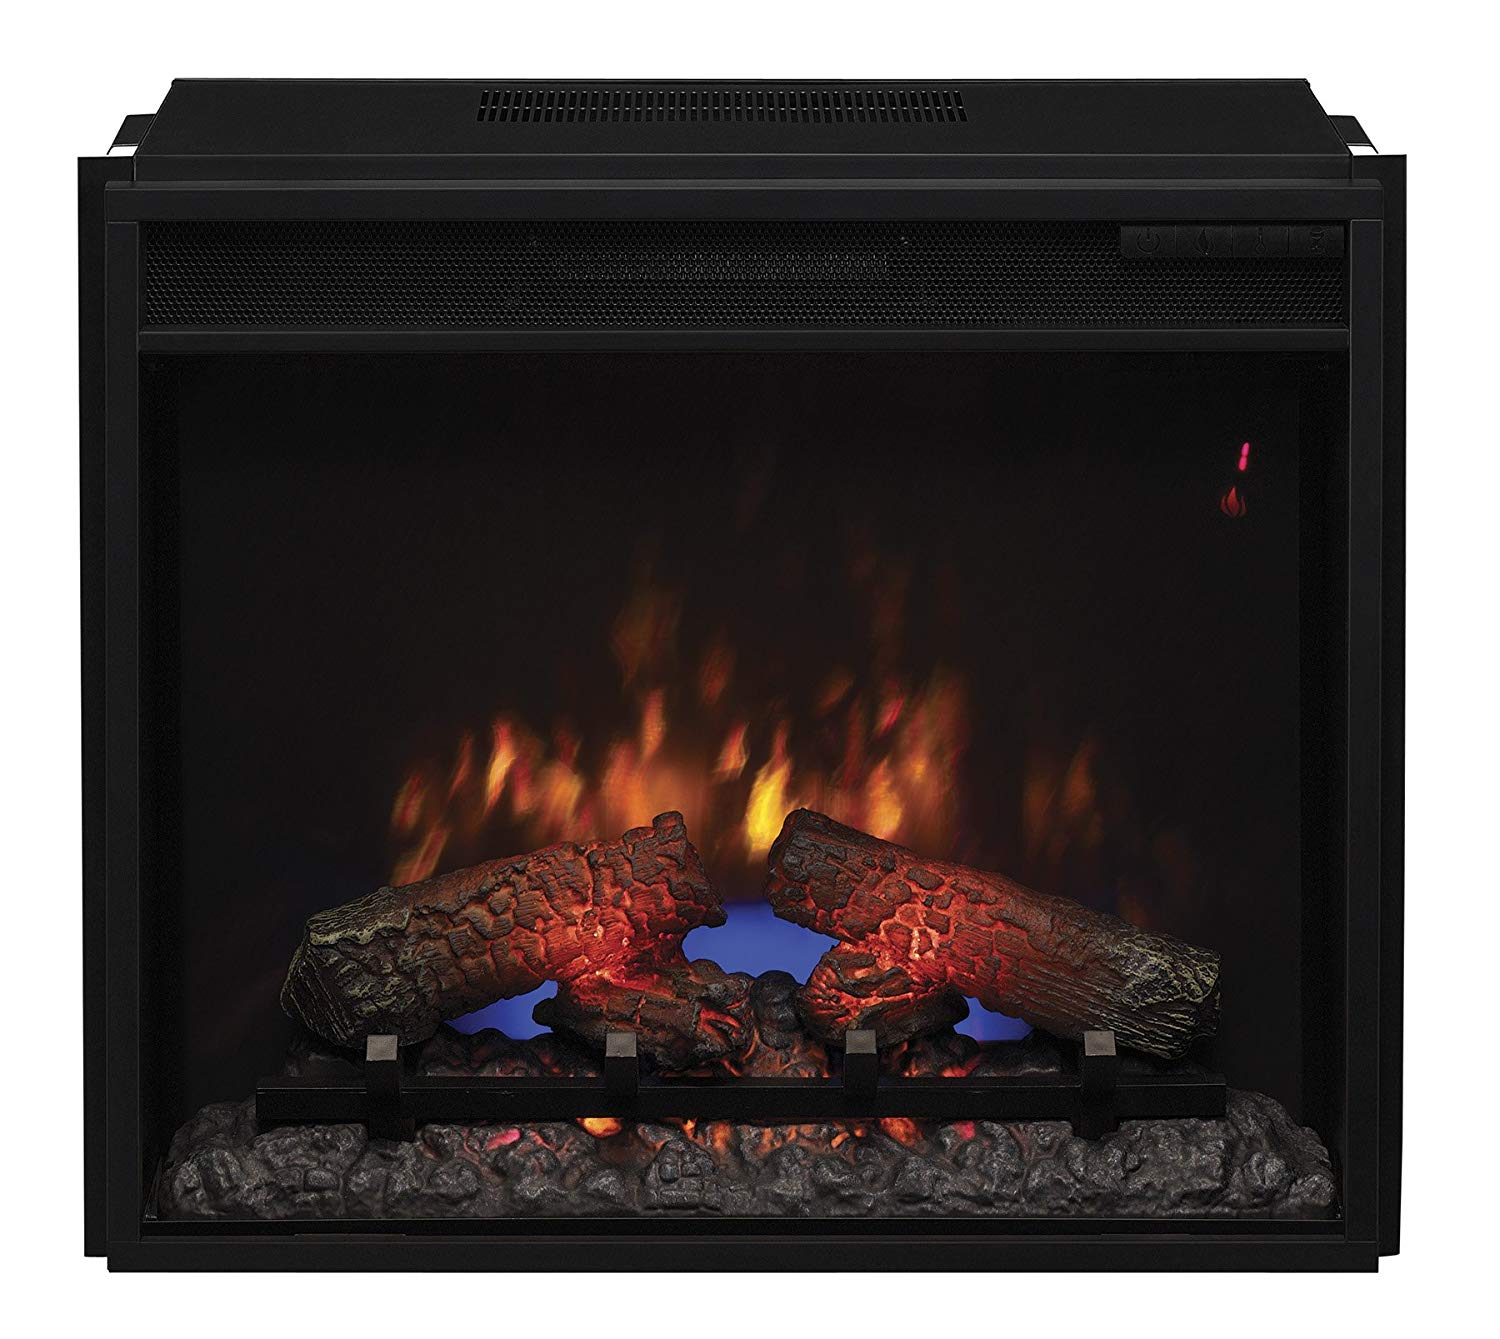 Duraflame Fireplace Insert Awesome Classicflame 23ef031grp 23" Electric Fireplace Insert with Safer Plug